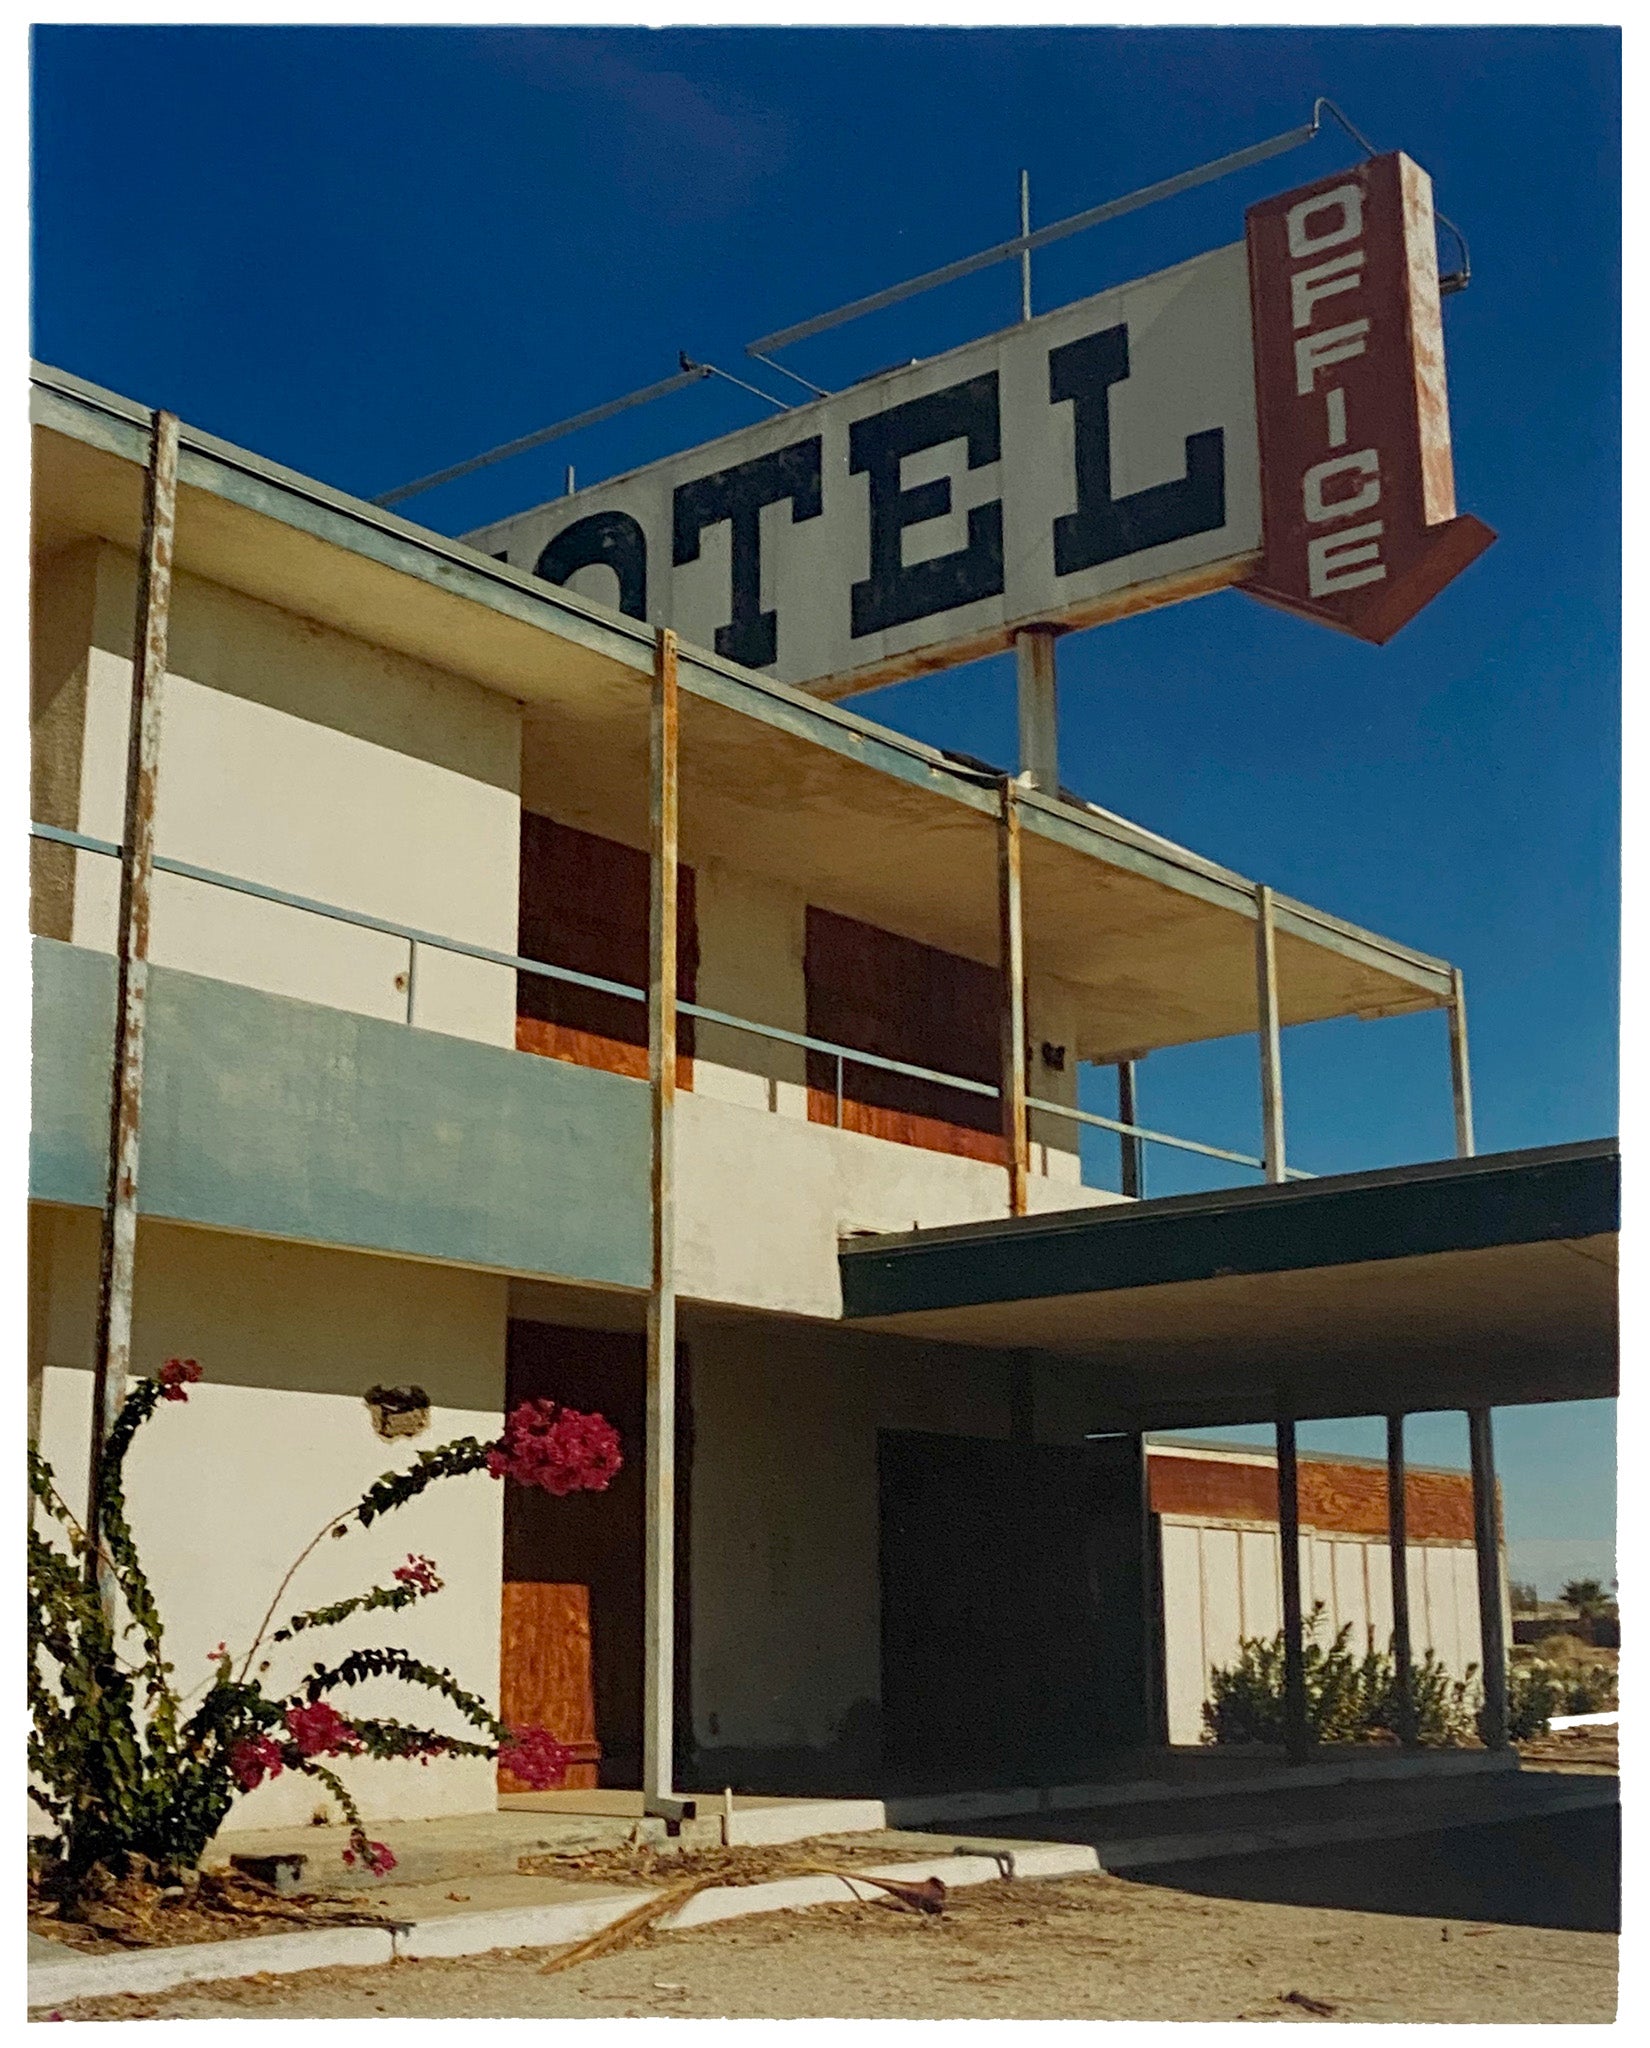 North Shore Motel Office II from Richard Heeps Salton Sea series. Blue skies over this Californian classic mid-century modern Americana Motel exterior. Captured by Richard Heeps in the Salton Sea in 2003 but only executed in his darkroom for the first time in Spring 2020.